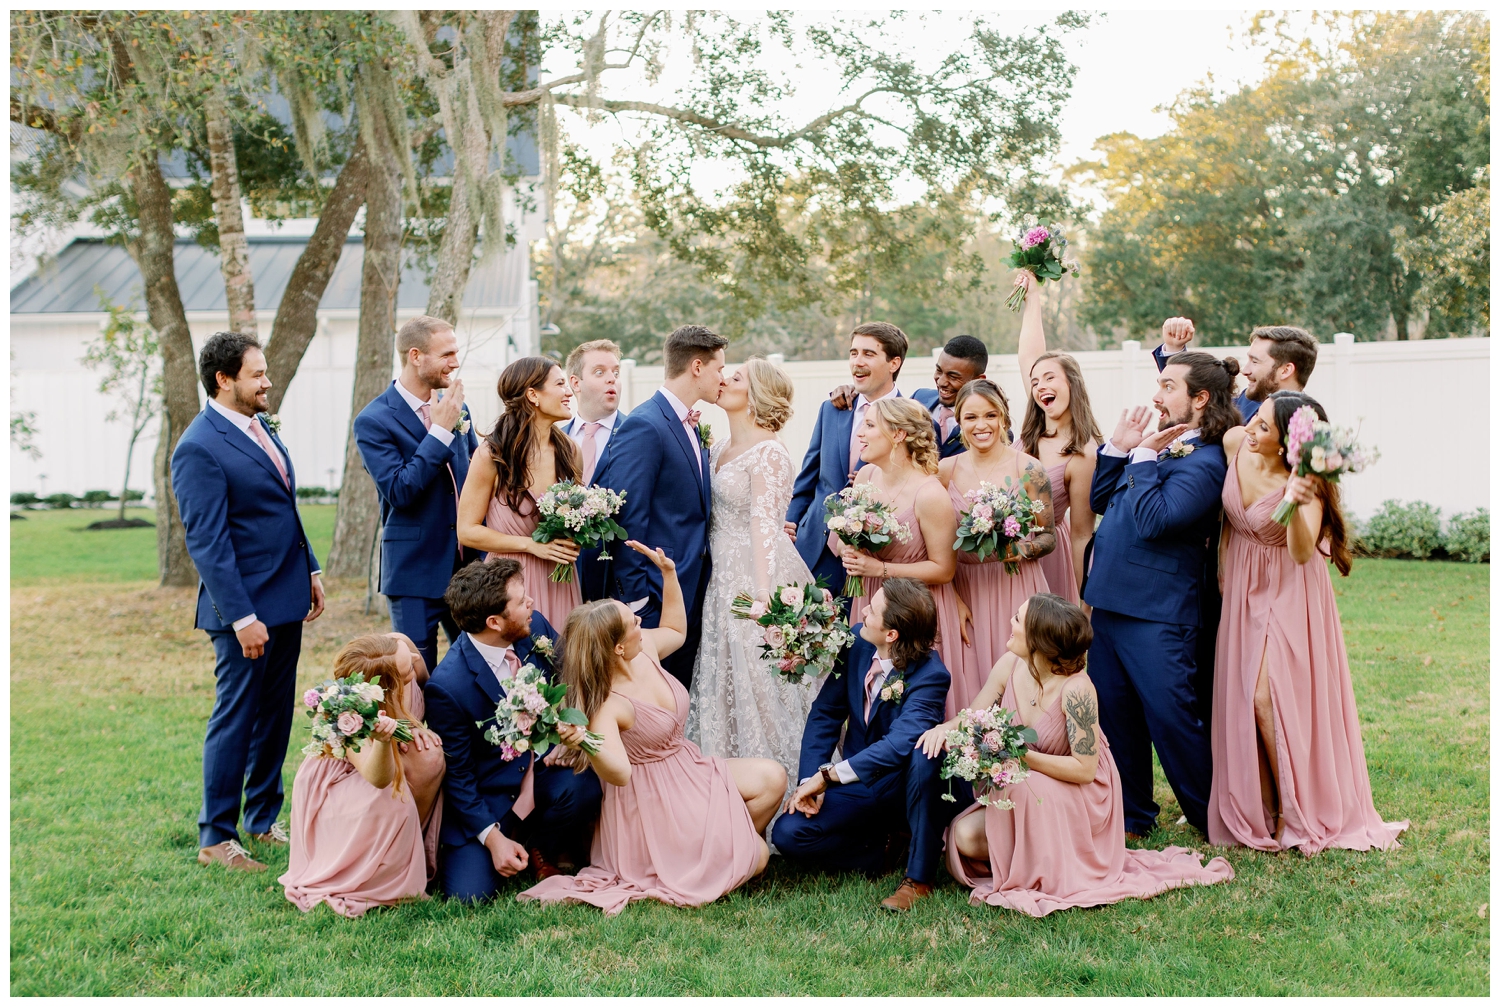 bride and groom kissing surrounded by their wedding party under trees at The Springs Wallisville Wedding venue